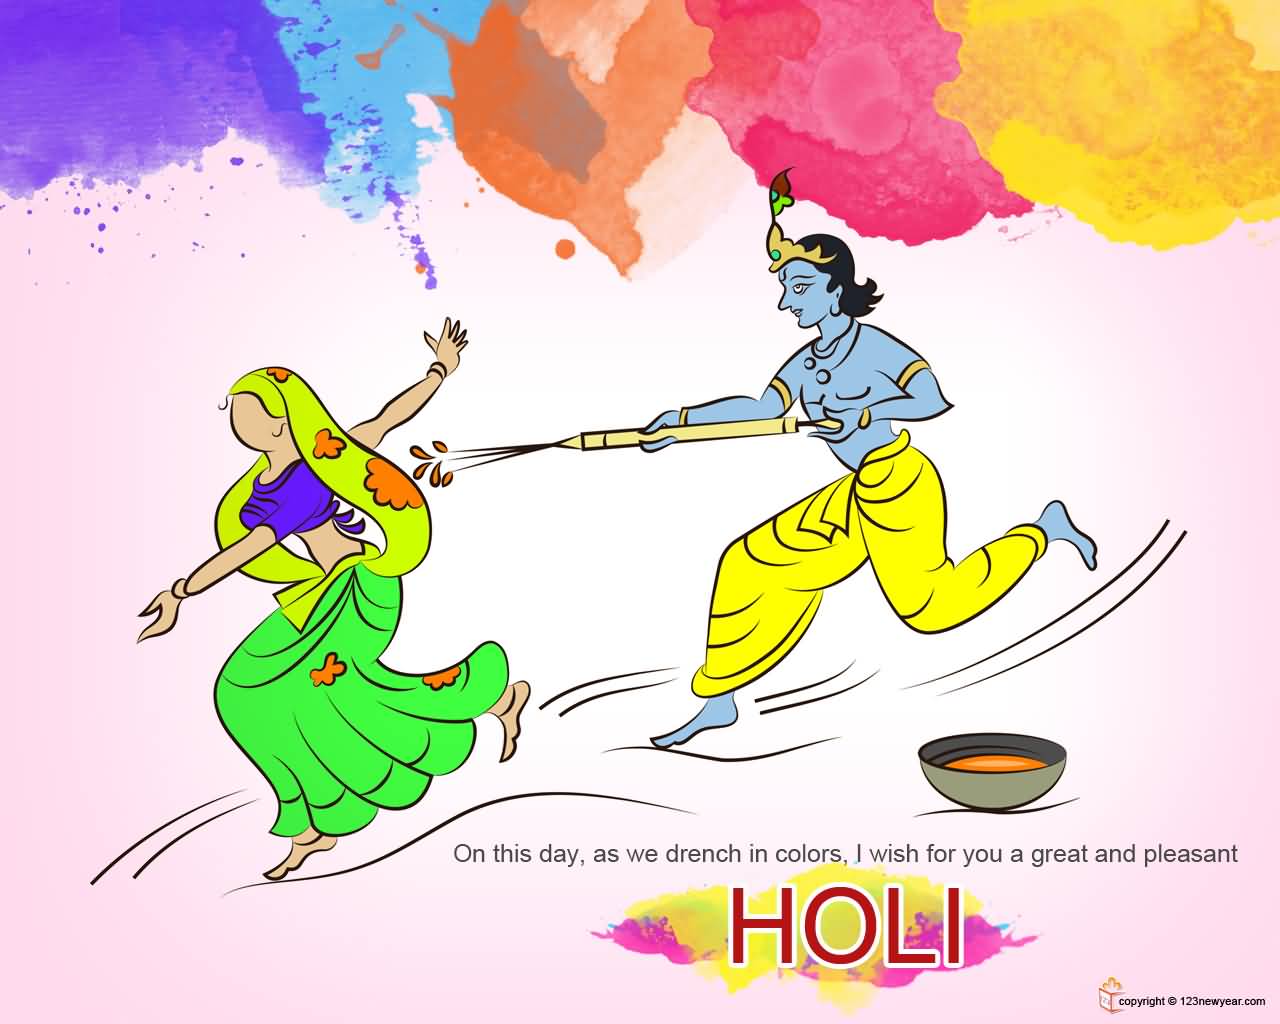 On This Day, As We Drench In Colors, I Wish For You A Great And Pleasant Holi